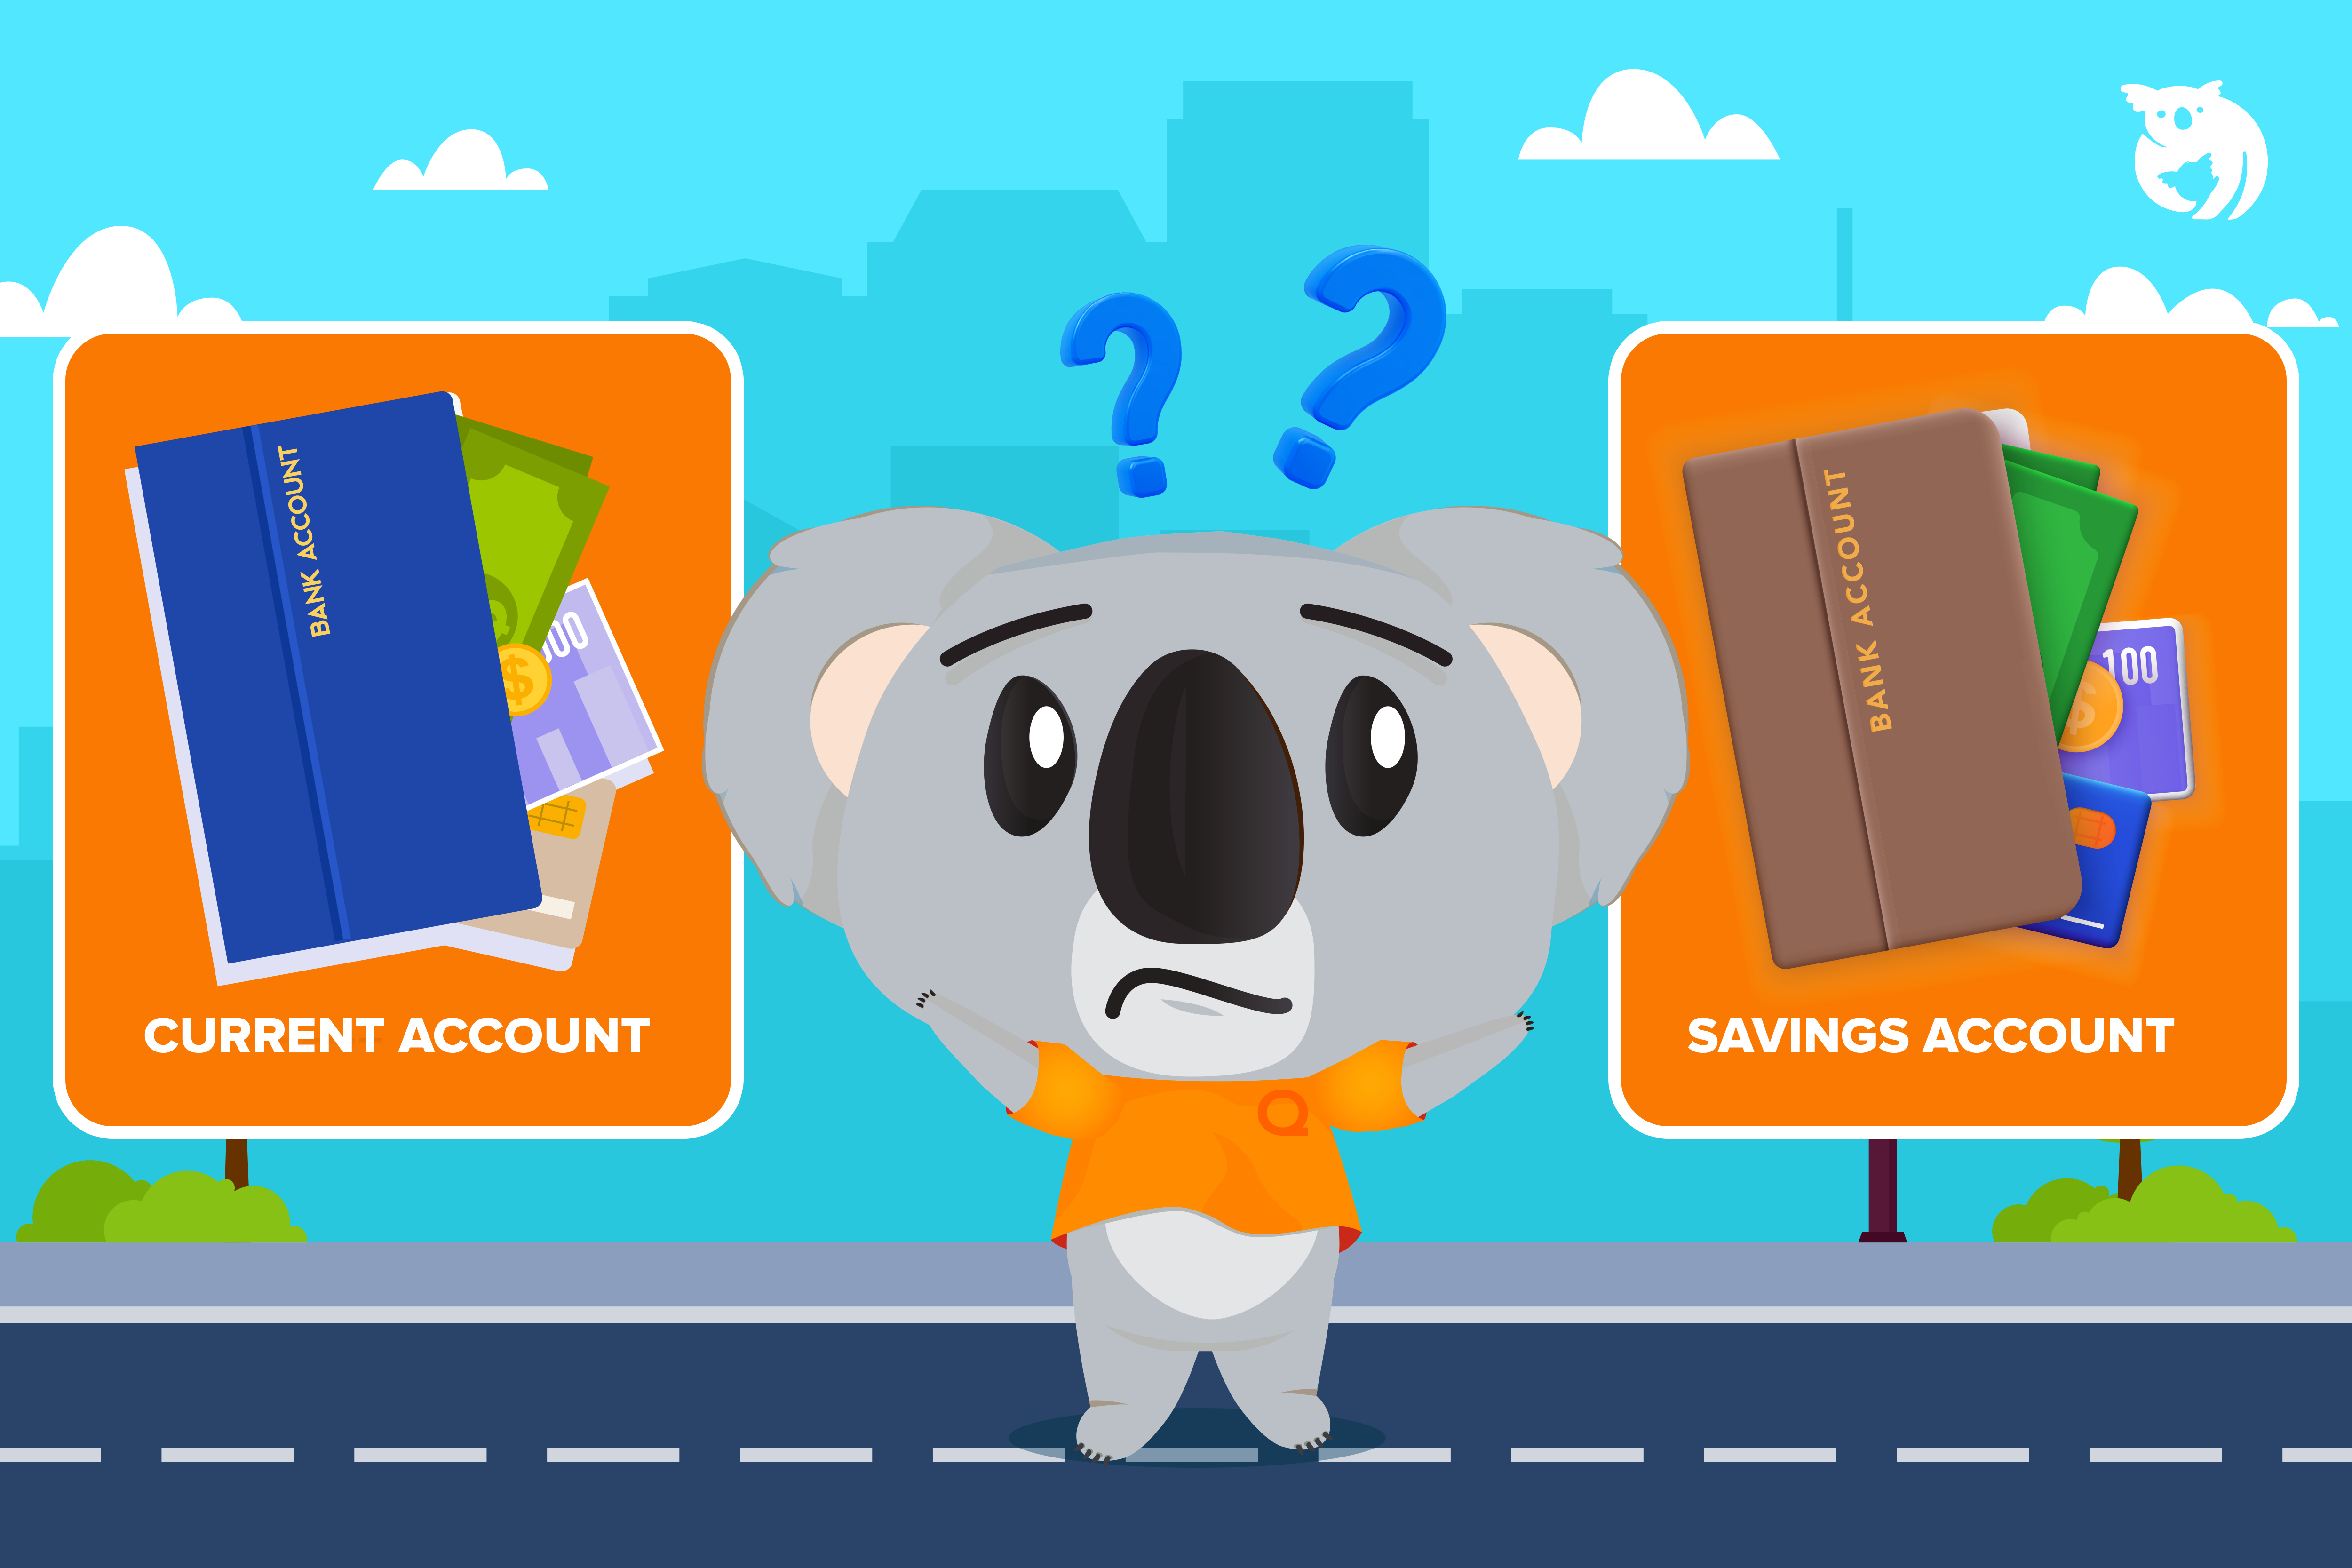 A Complete Guide to Current Account vs Savings Account - Pesan By Qoala